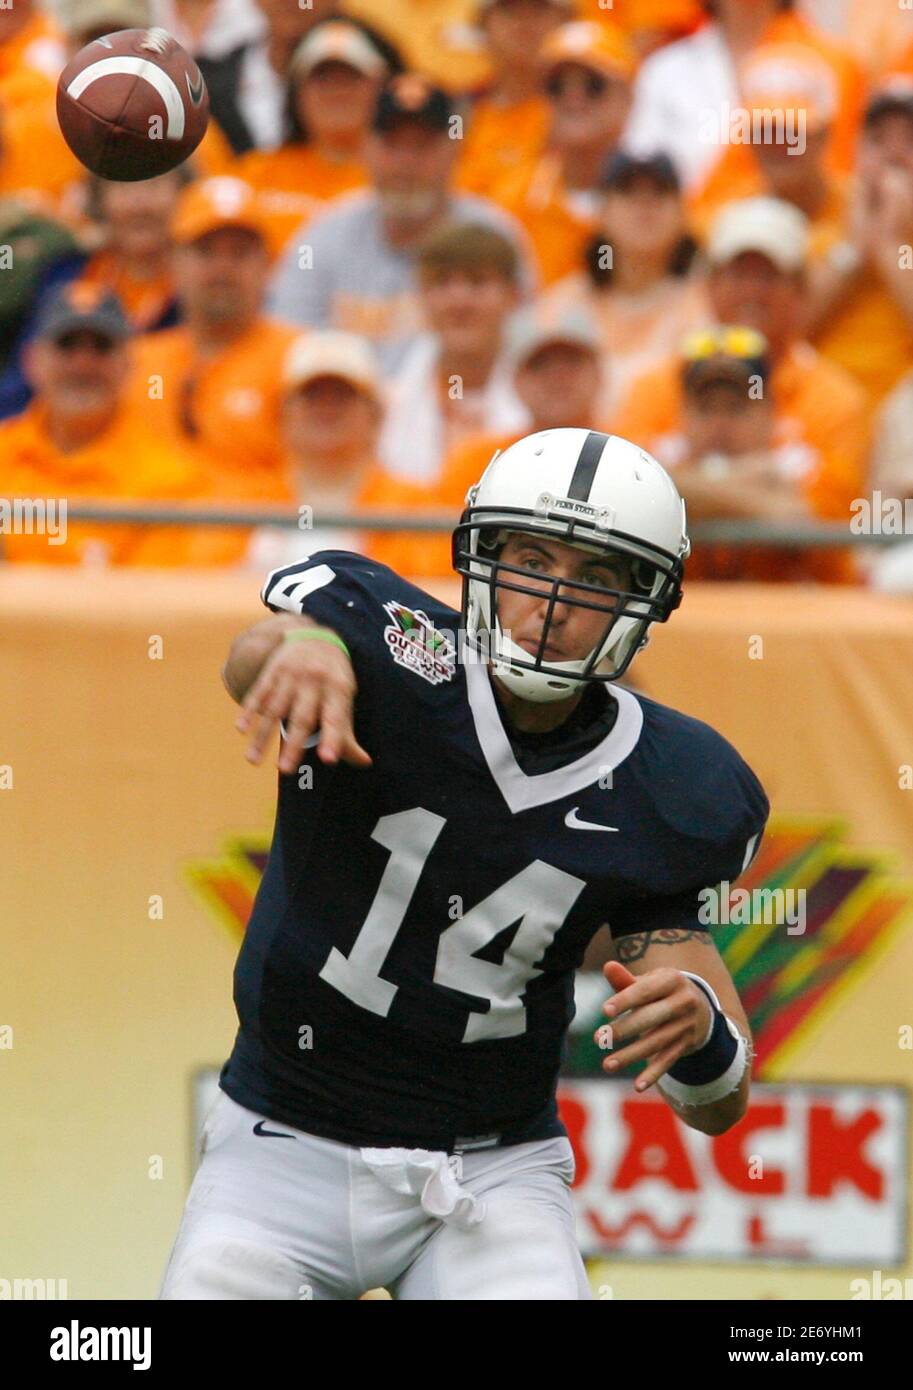 penn-state-quarterback-anthony-morelli-14-throws-against-the-university-of-tennessee-in-the-third-quarter-of-the-outback-bowl-in-tampa-florida-january-1-2007-reuterscharles-w-luzier-united-states-2E6YHM1.jpg